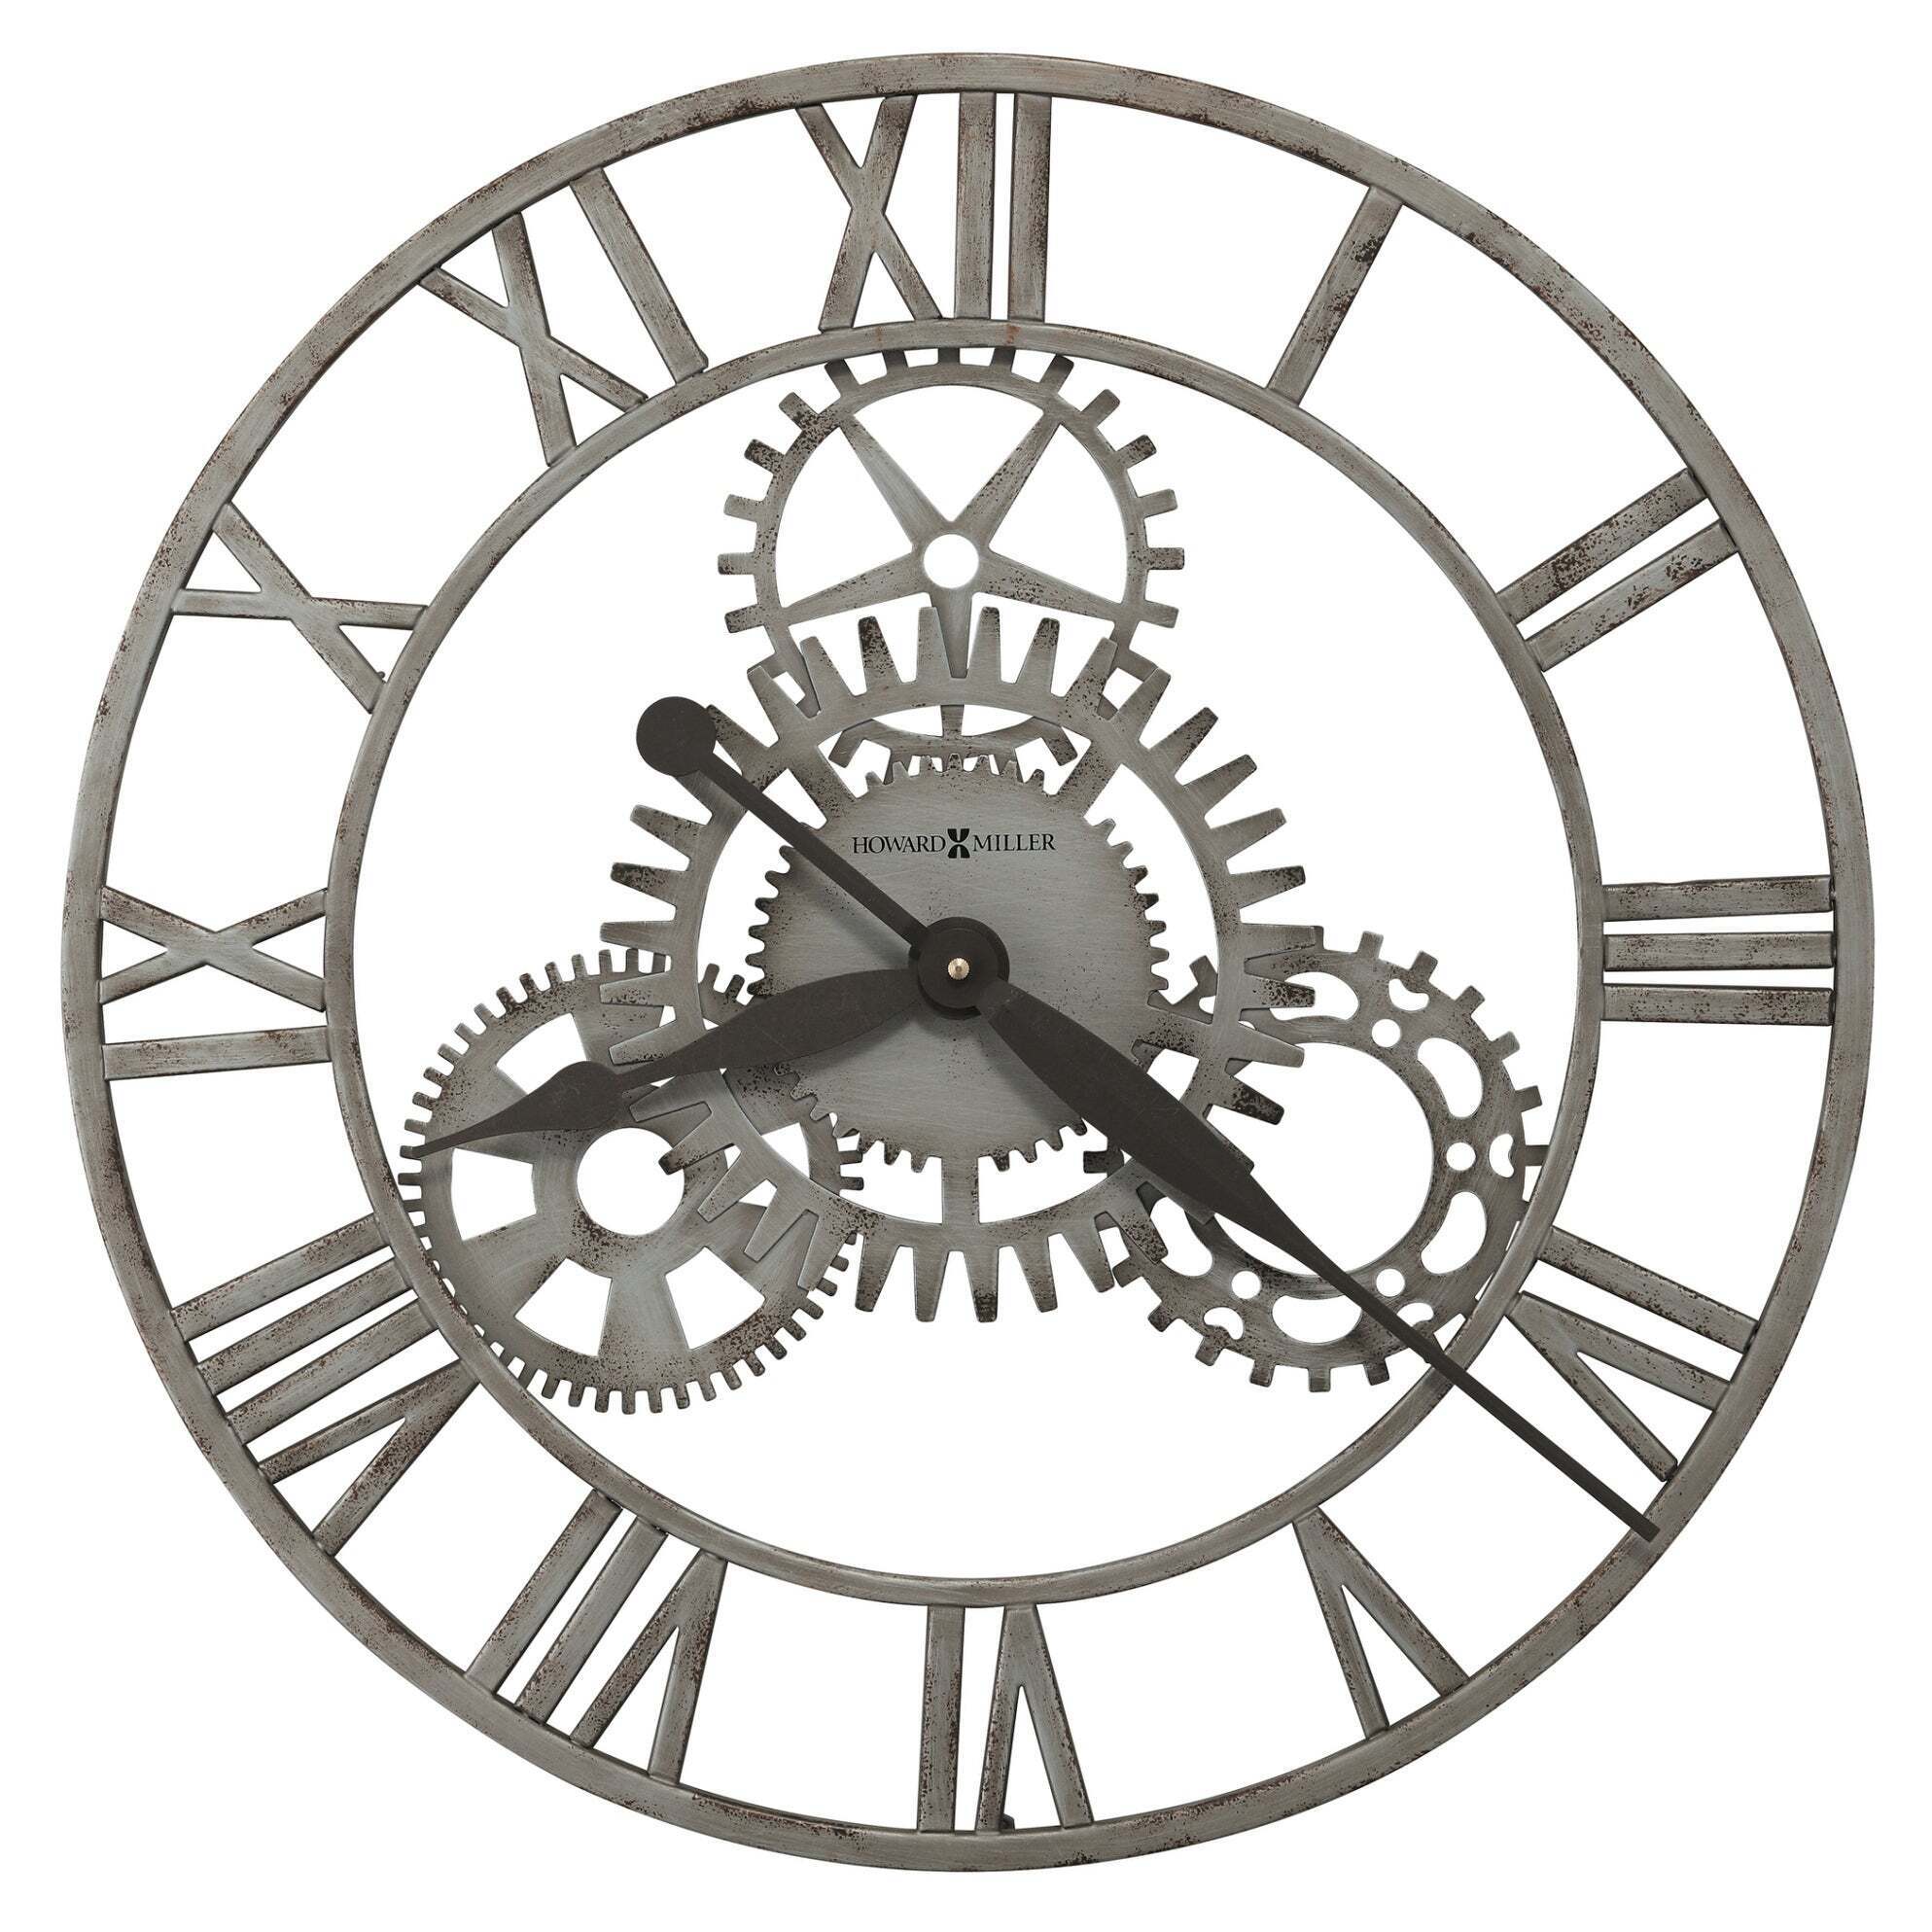 The steampunk giant wall clock you’ve been waiting for